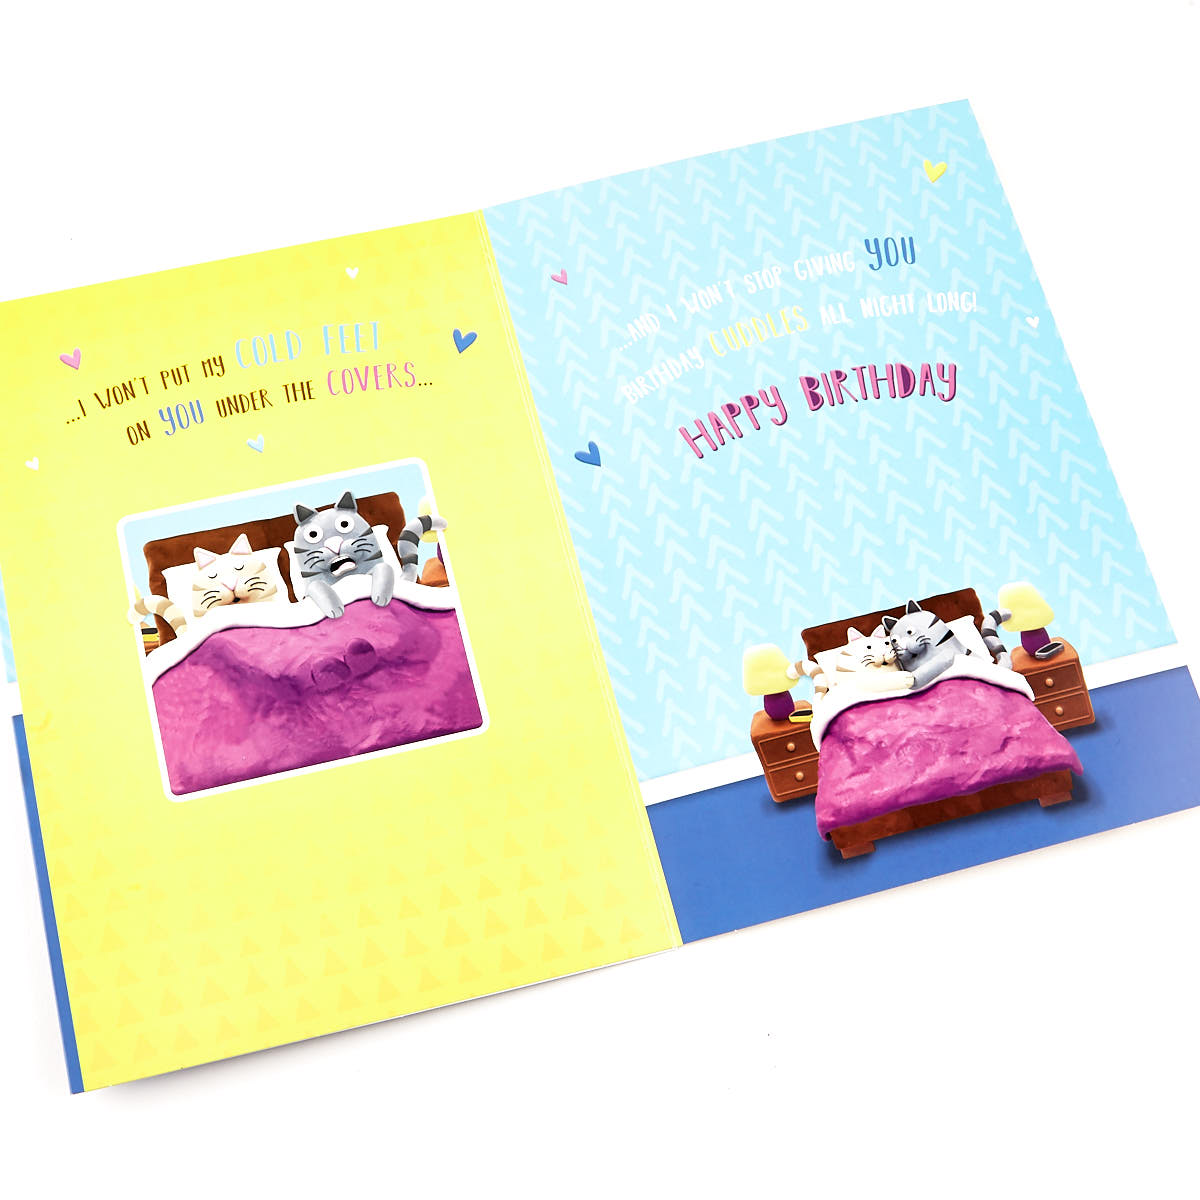 Signature Collection Birthday Card - Husband Cats 